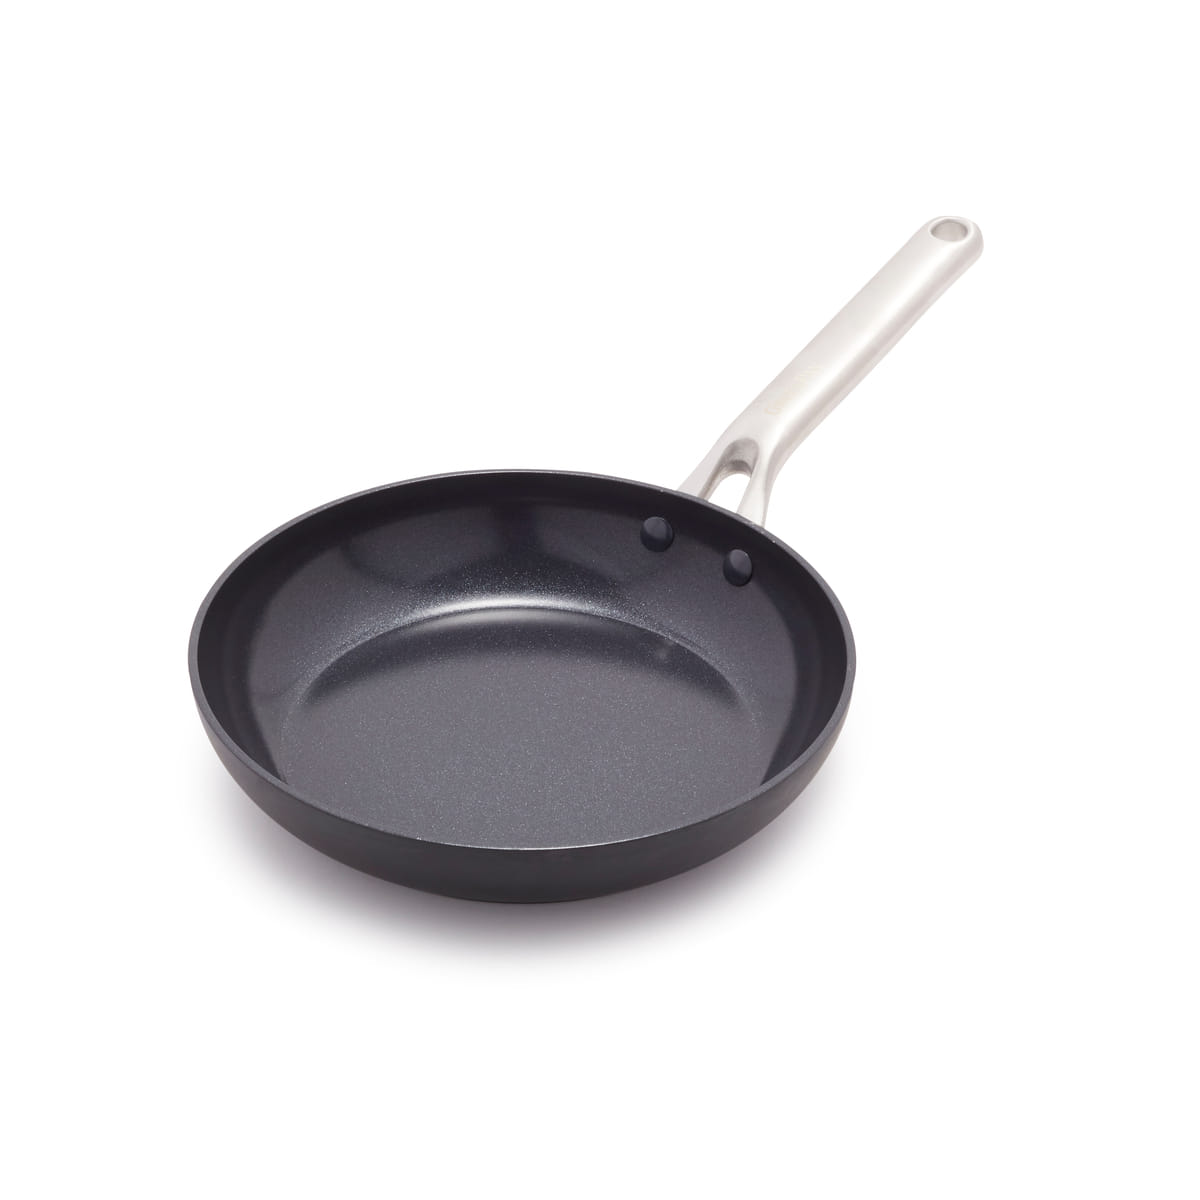 CC006539-001 - Omega Frying Pan With Lid, Black - 24cm - Product Image 1